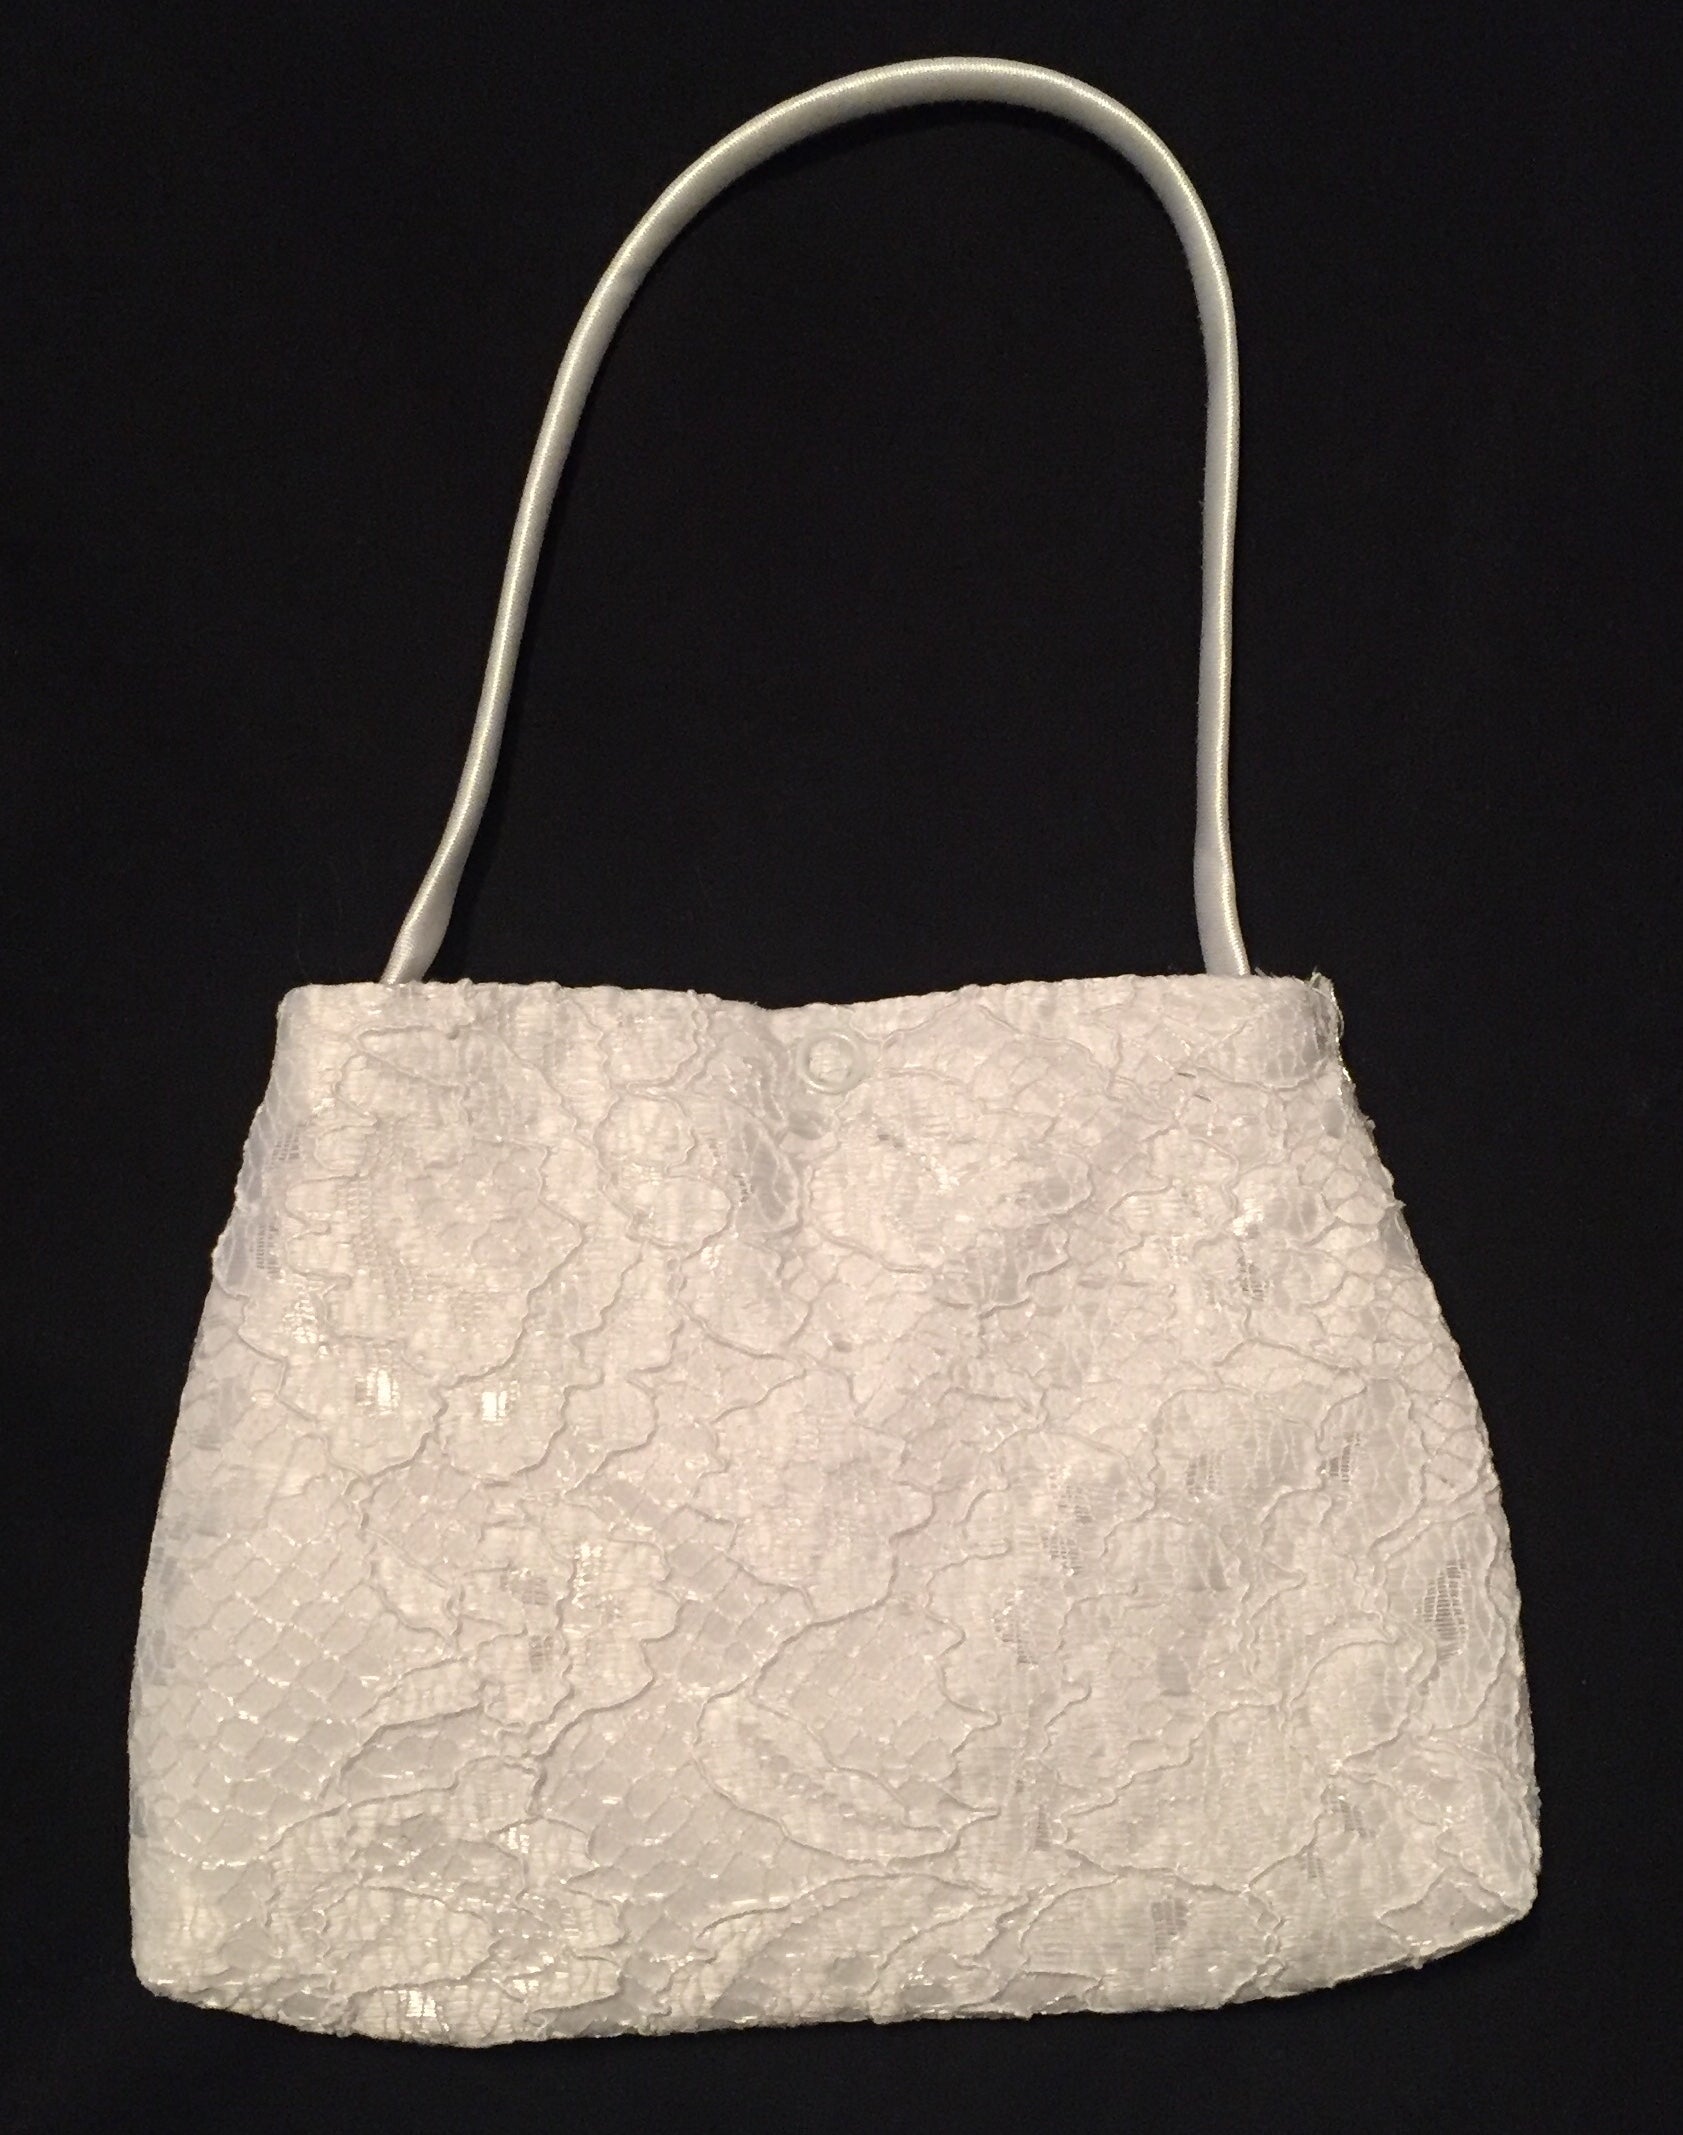 Girls White Lace Purse with Silver Flowers - LT-CP25 - back